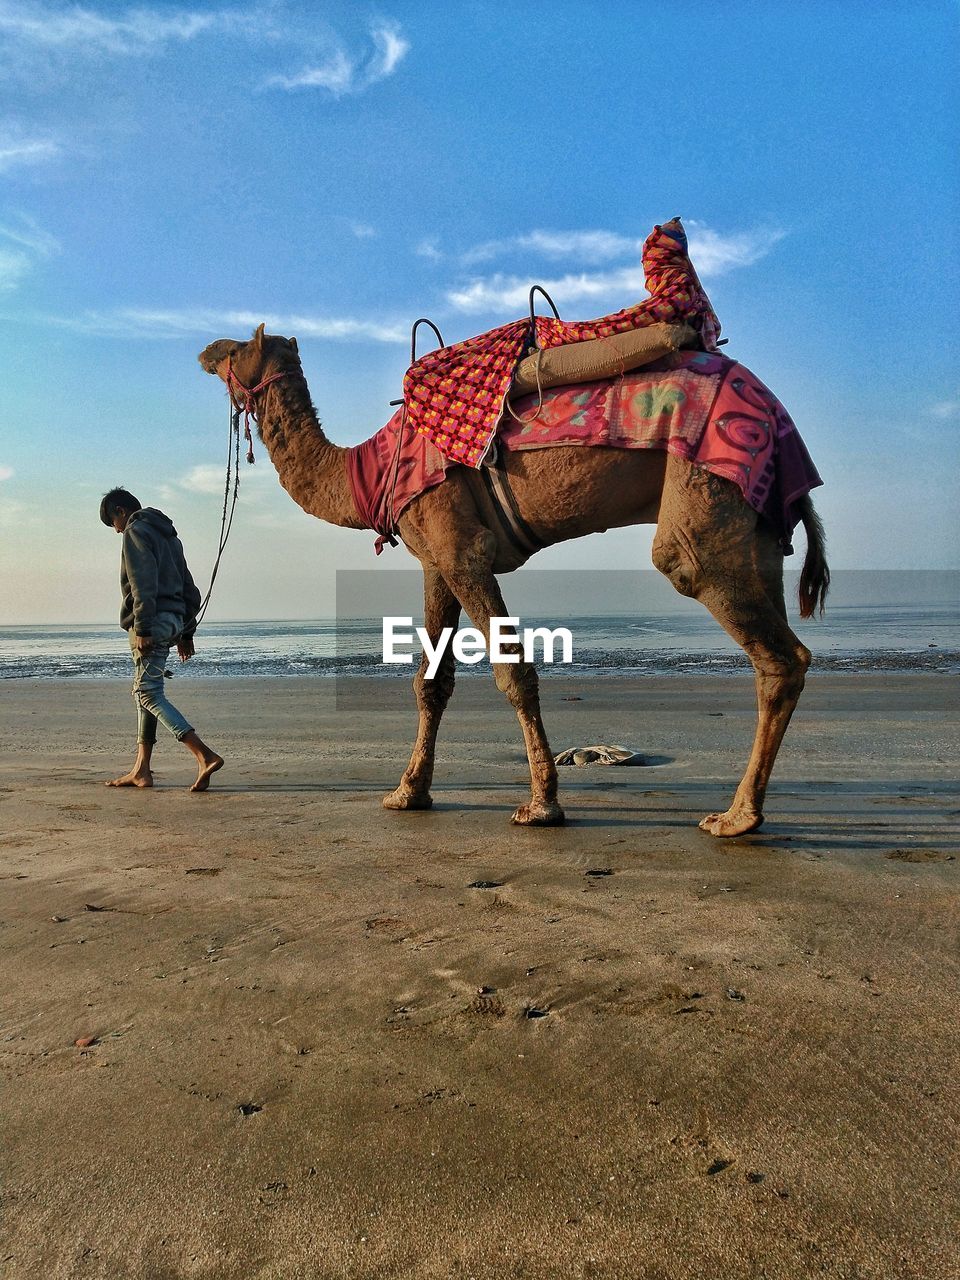 Man with camel walking on shore at beach against sky